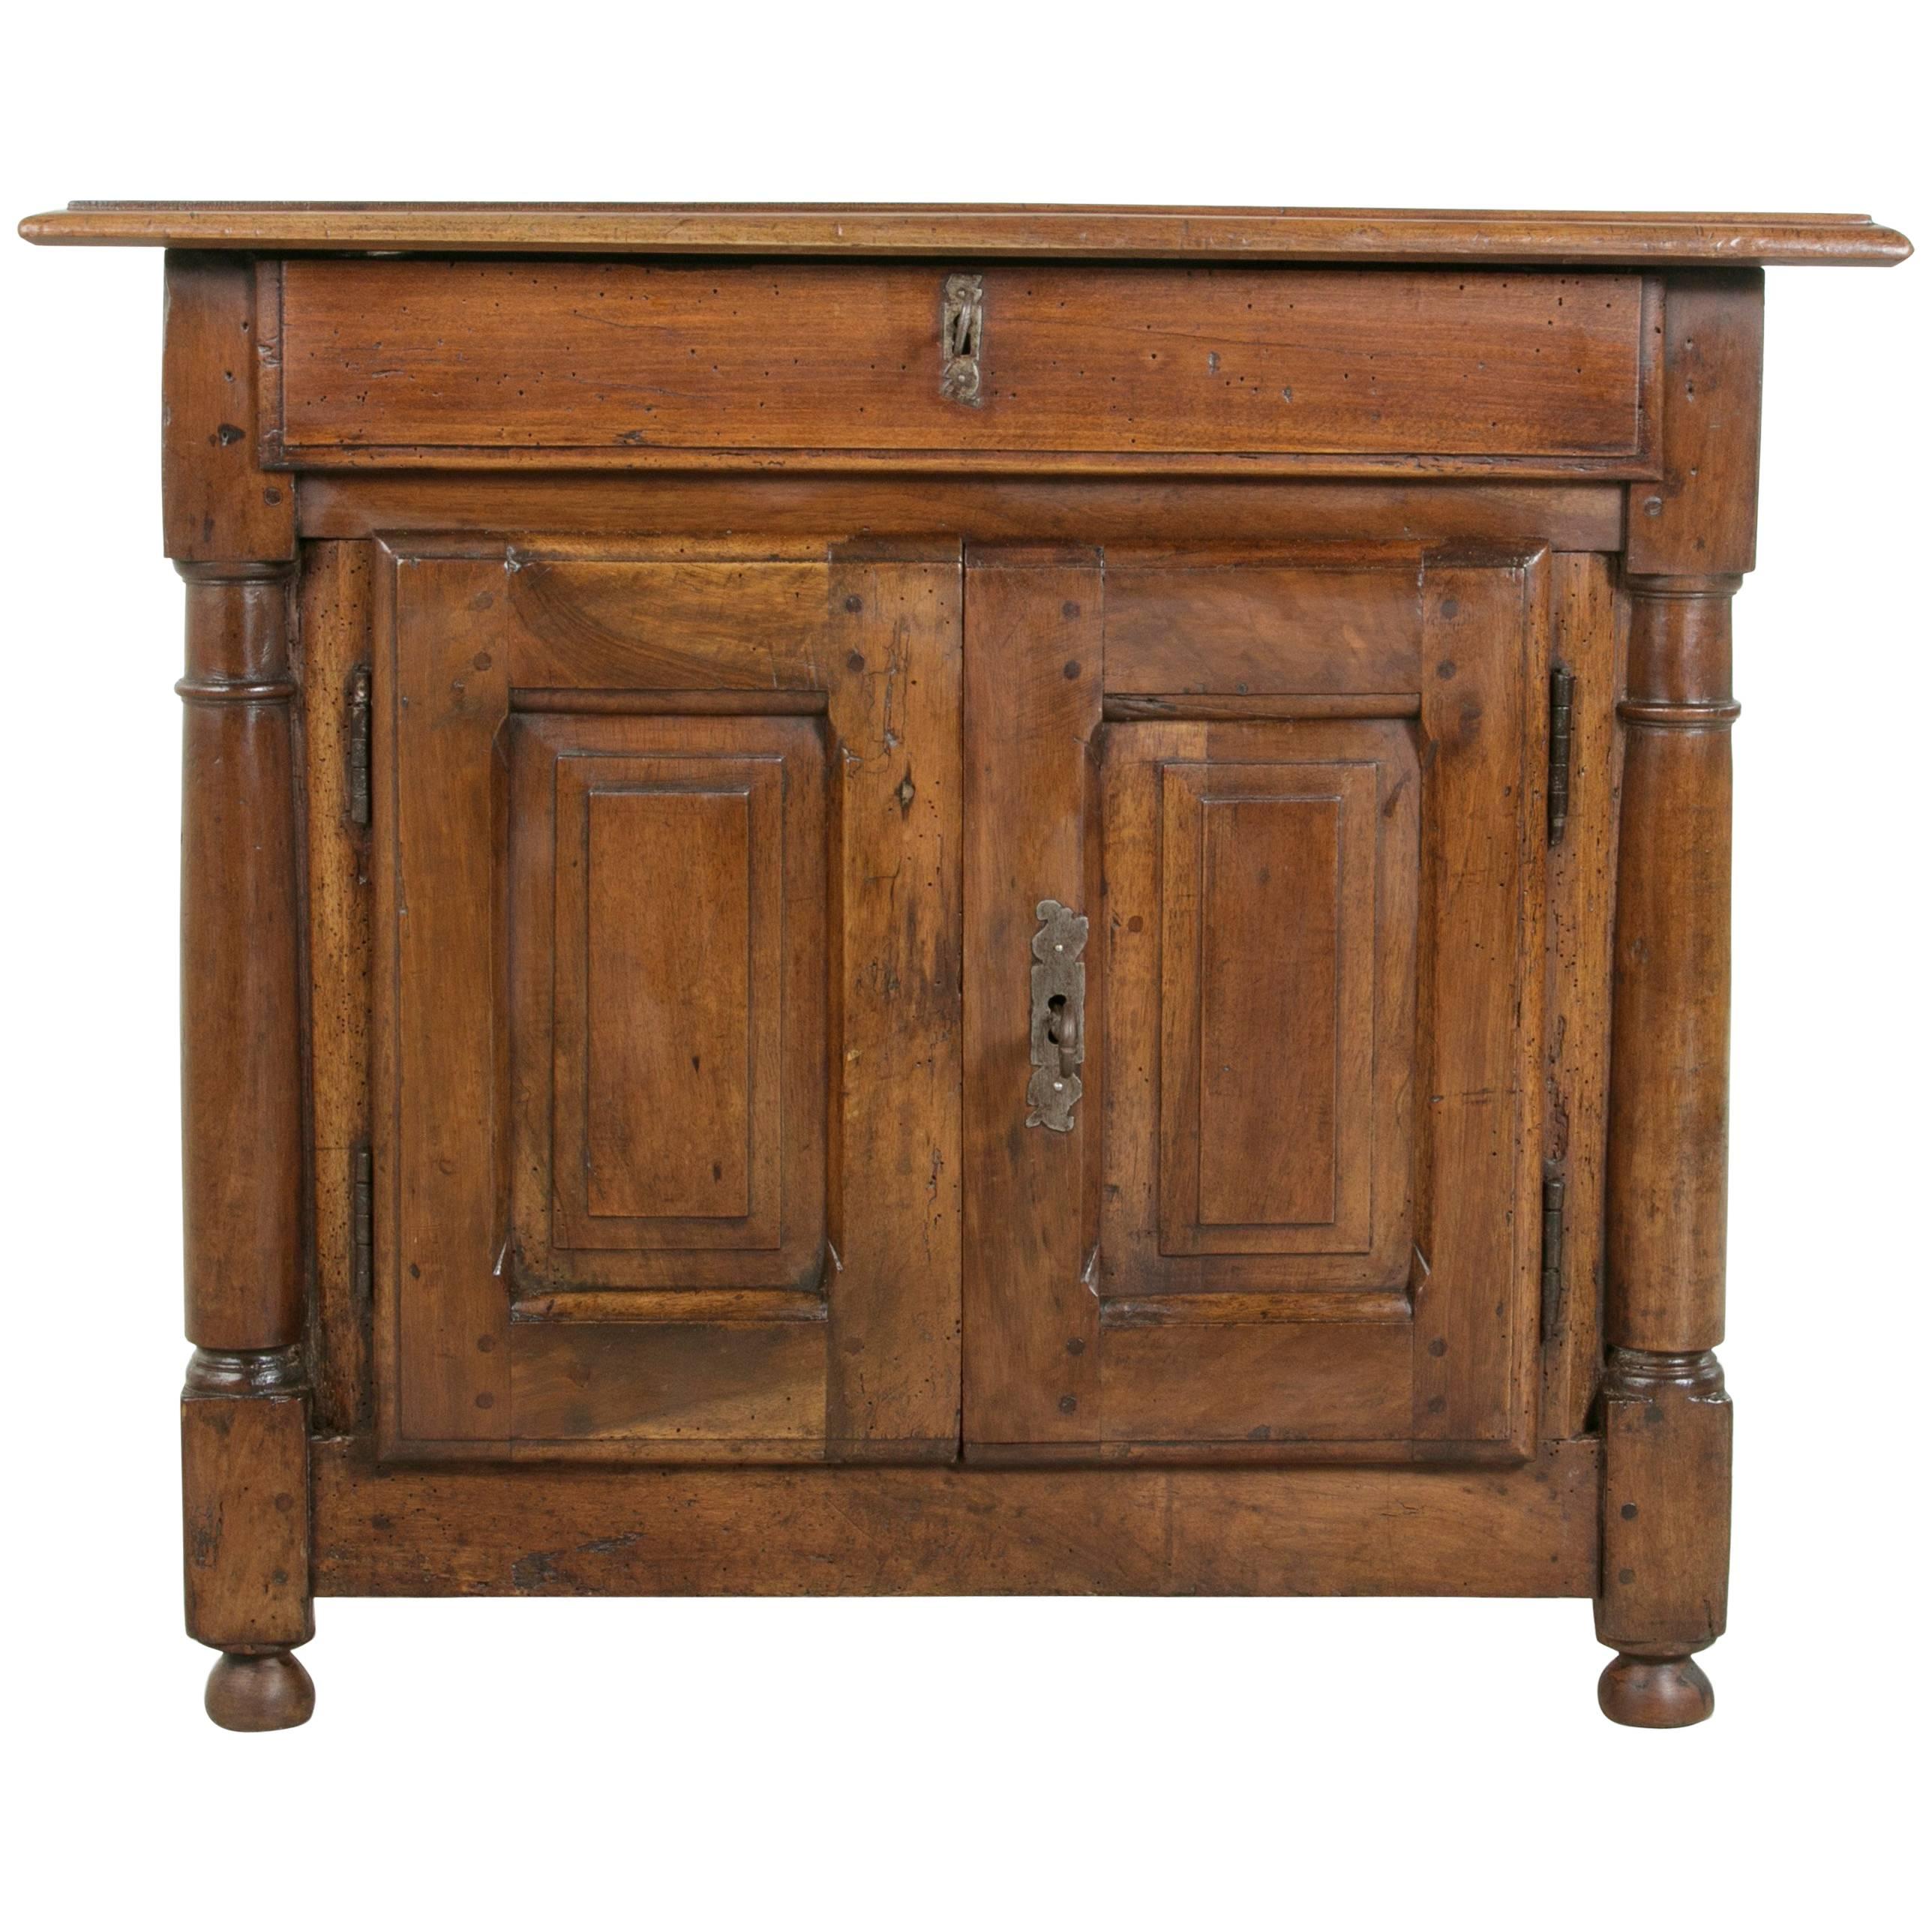 Small-Scale Late 18th Century French Walnut Cabinet or Nightstand